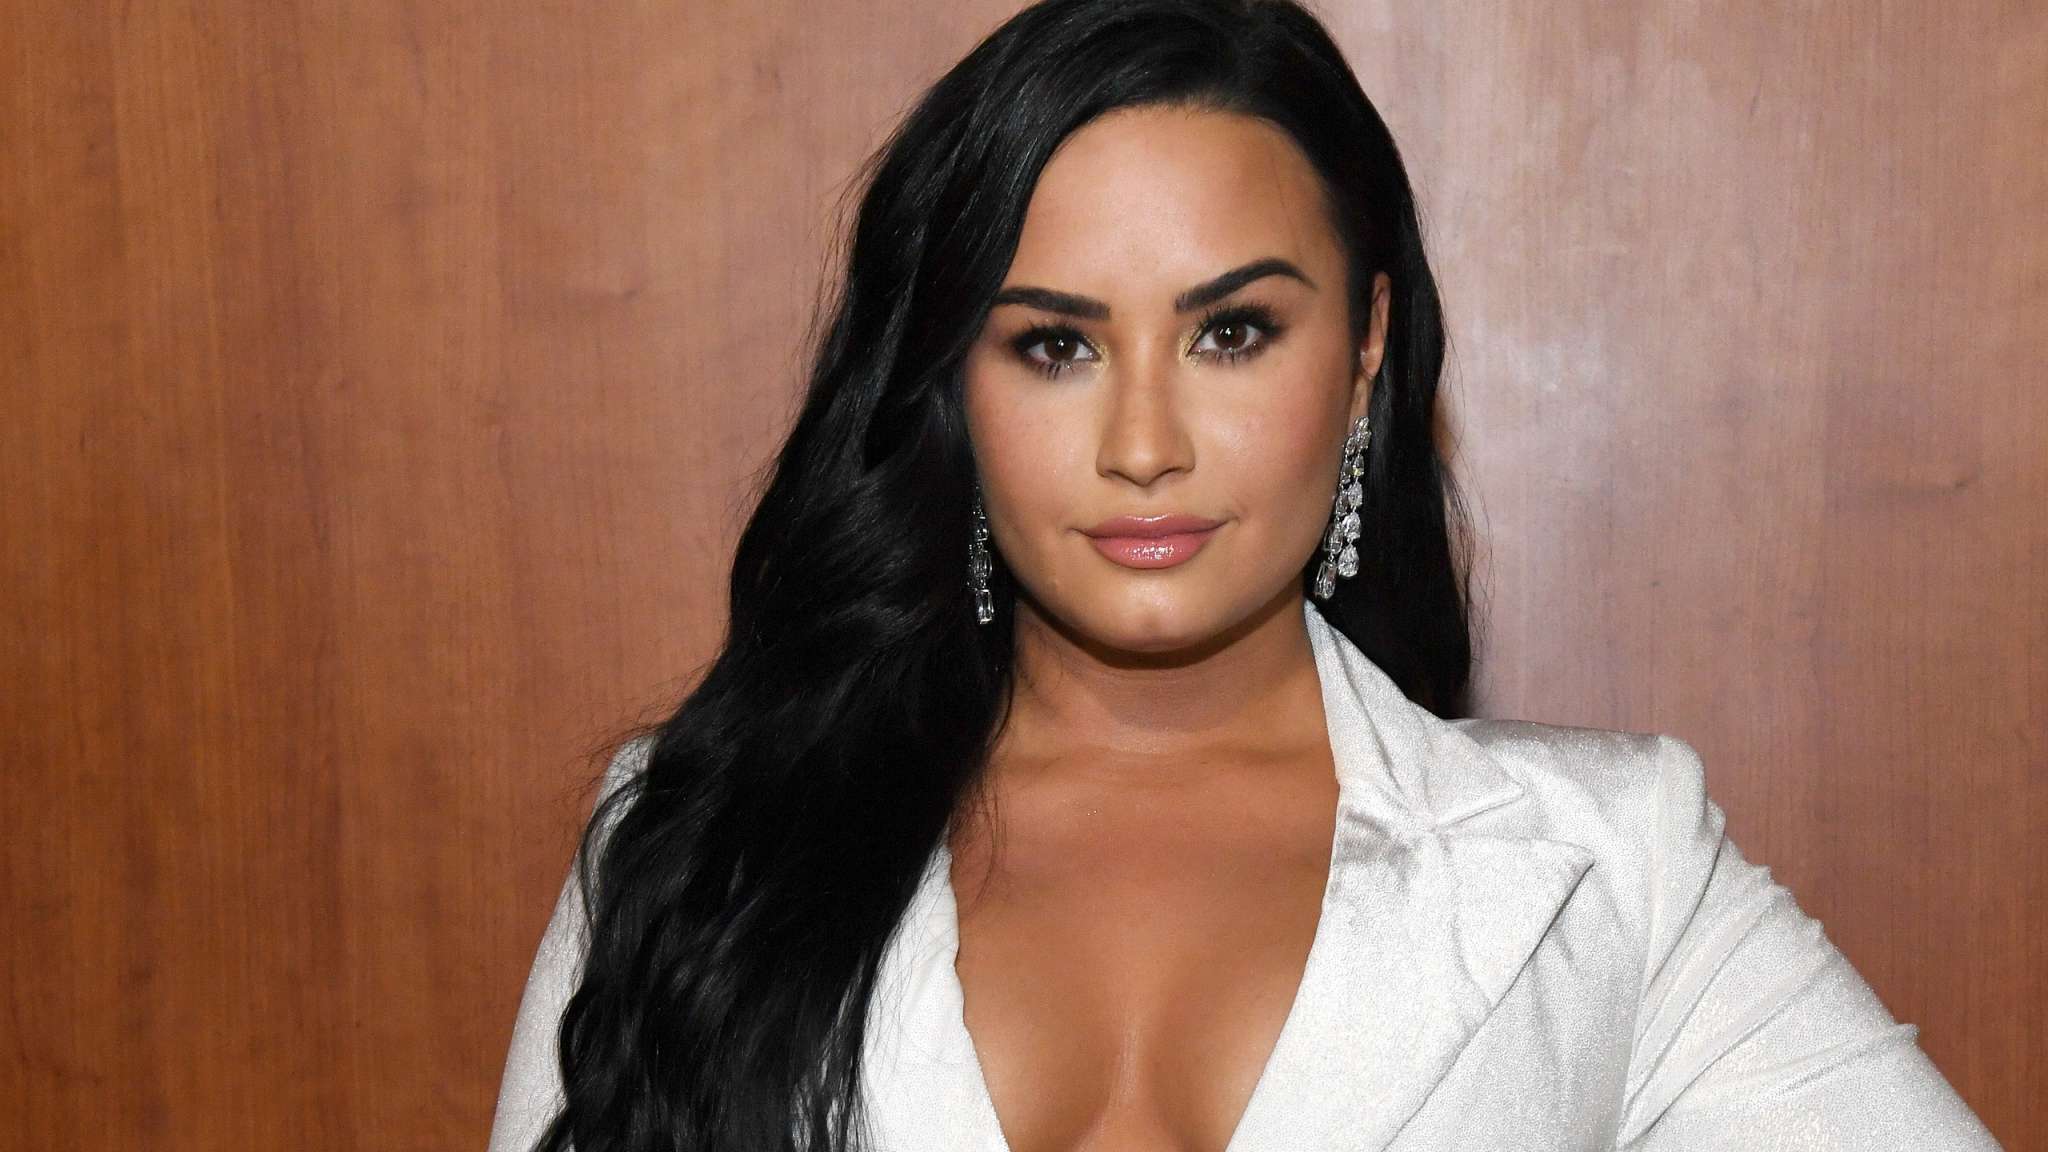 Demi Lovato Talks About Motherhood Plans But Has No Desire To Be Pregnant!